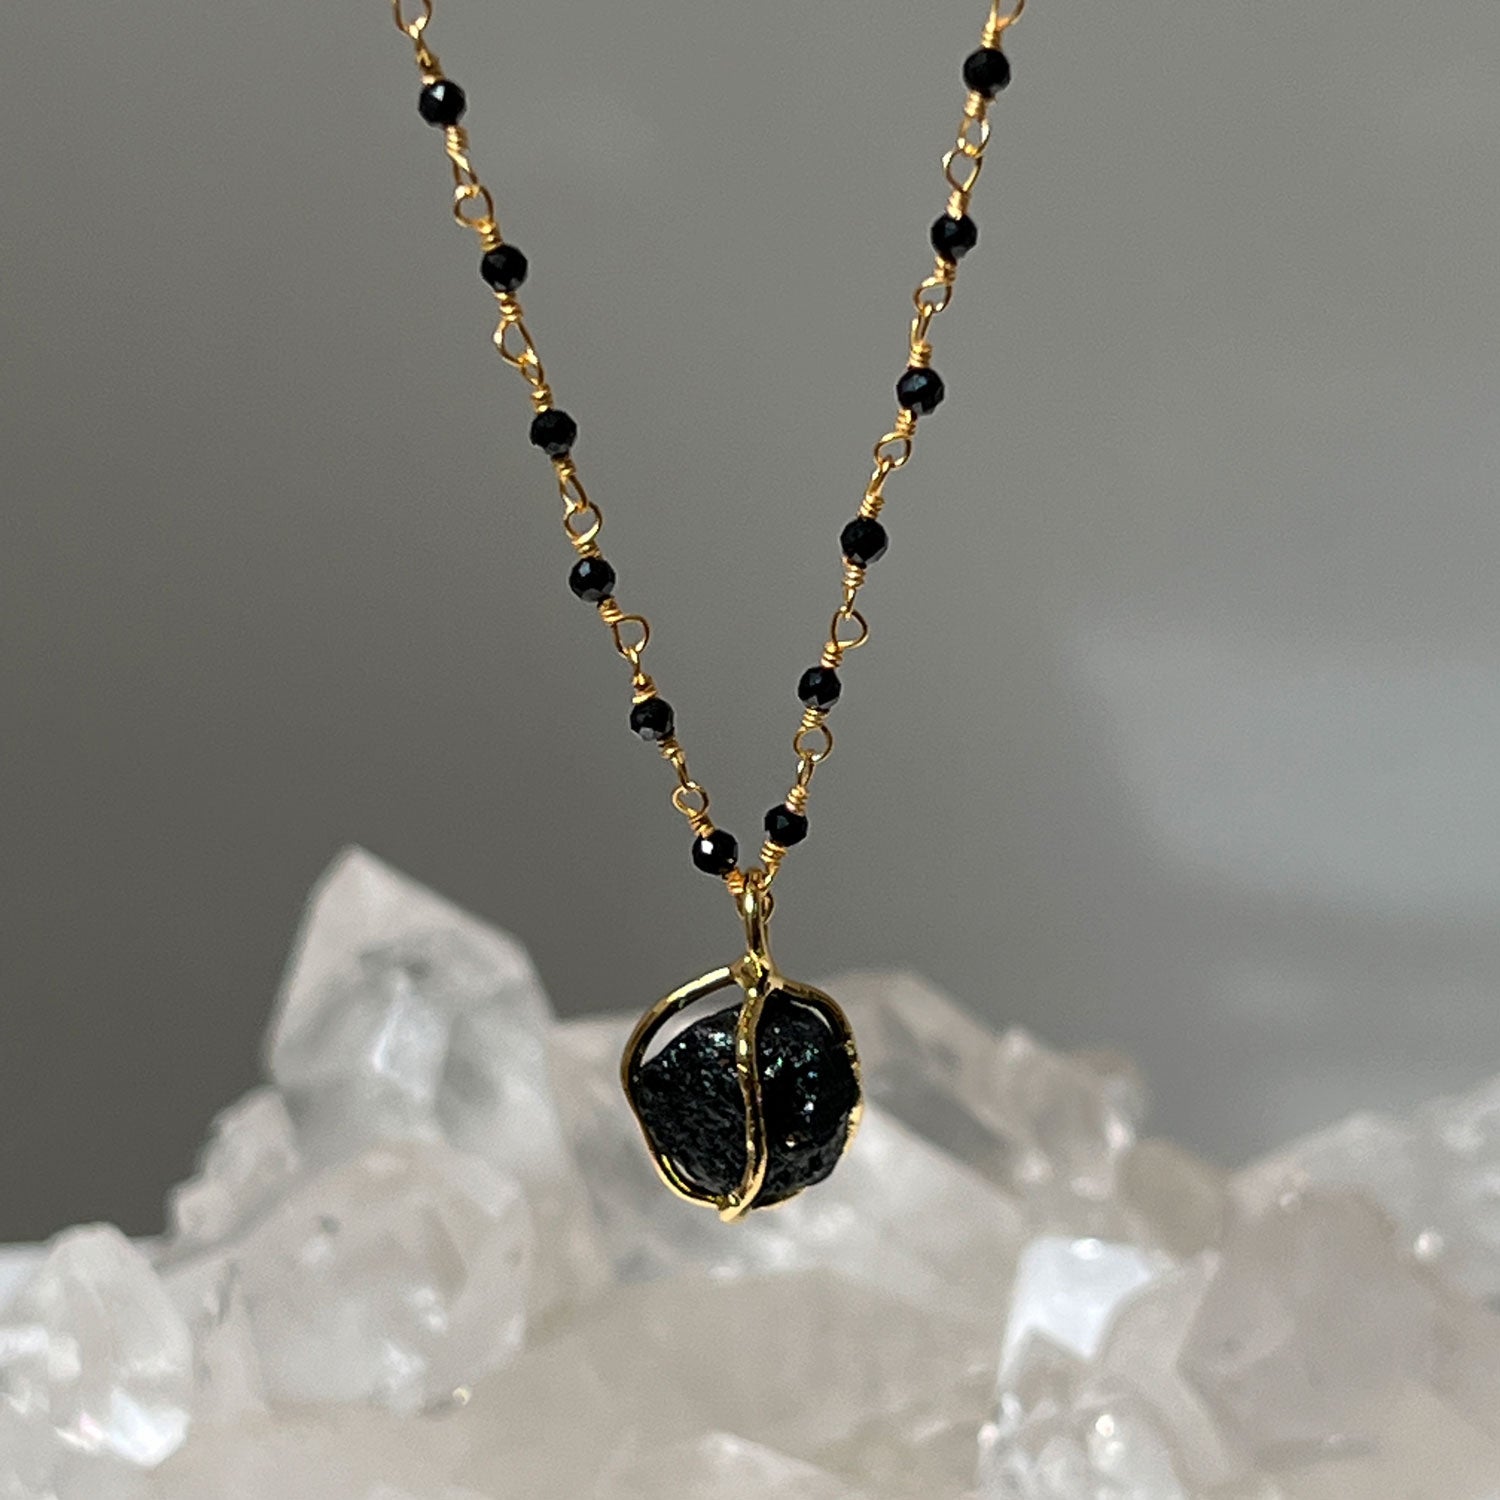 Raw Black Tourmaline in Cage on Long Black Onyx Rosary